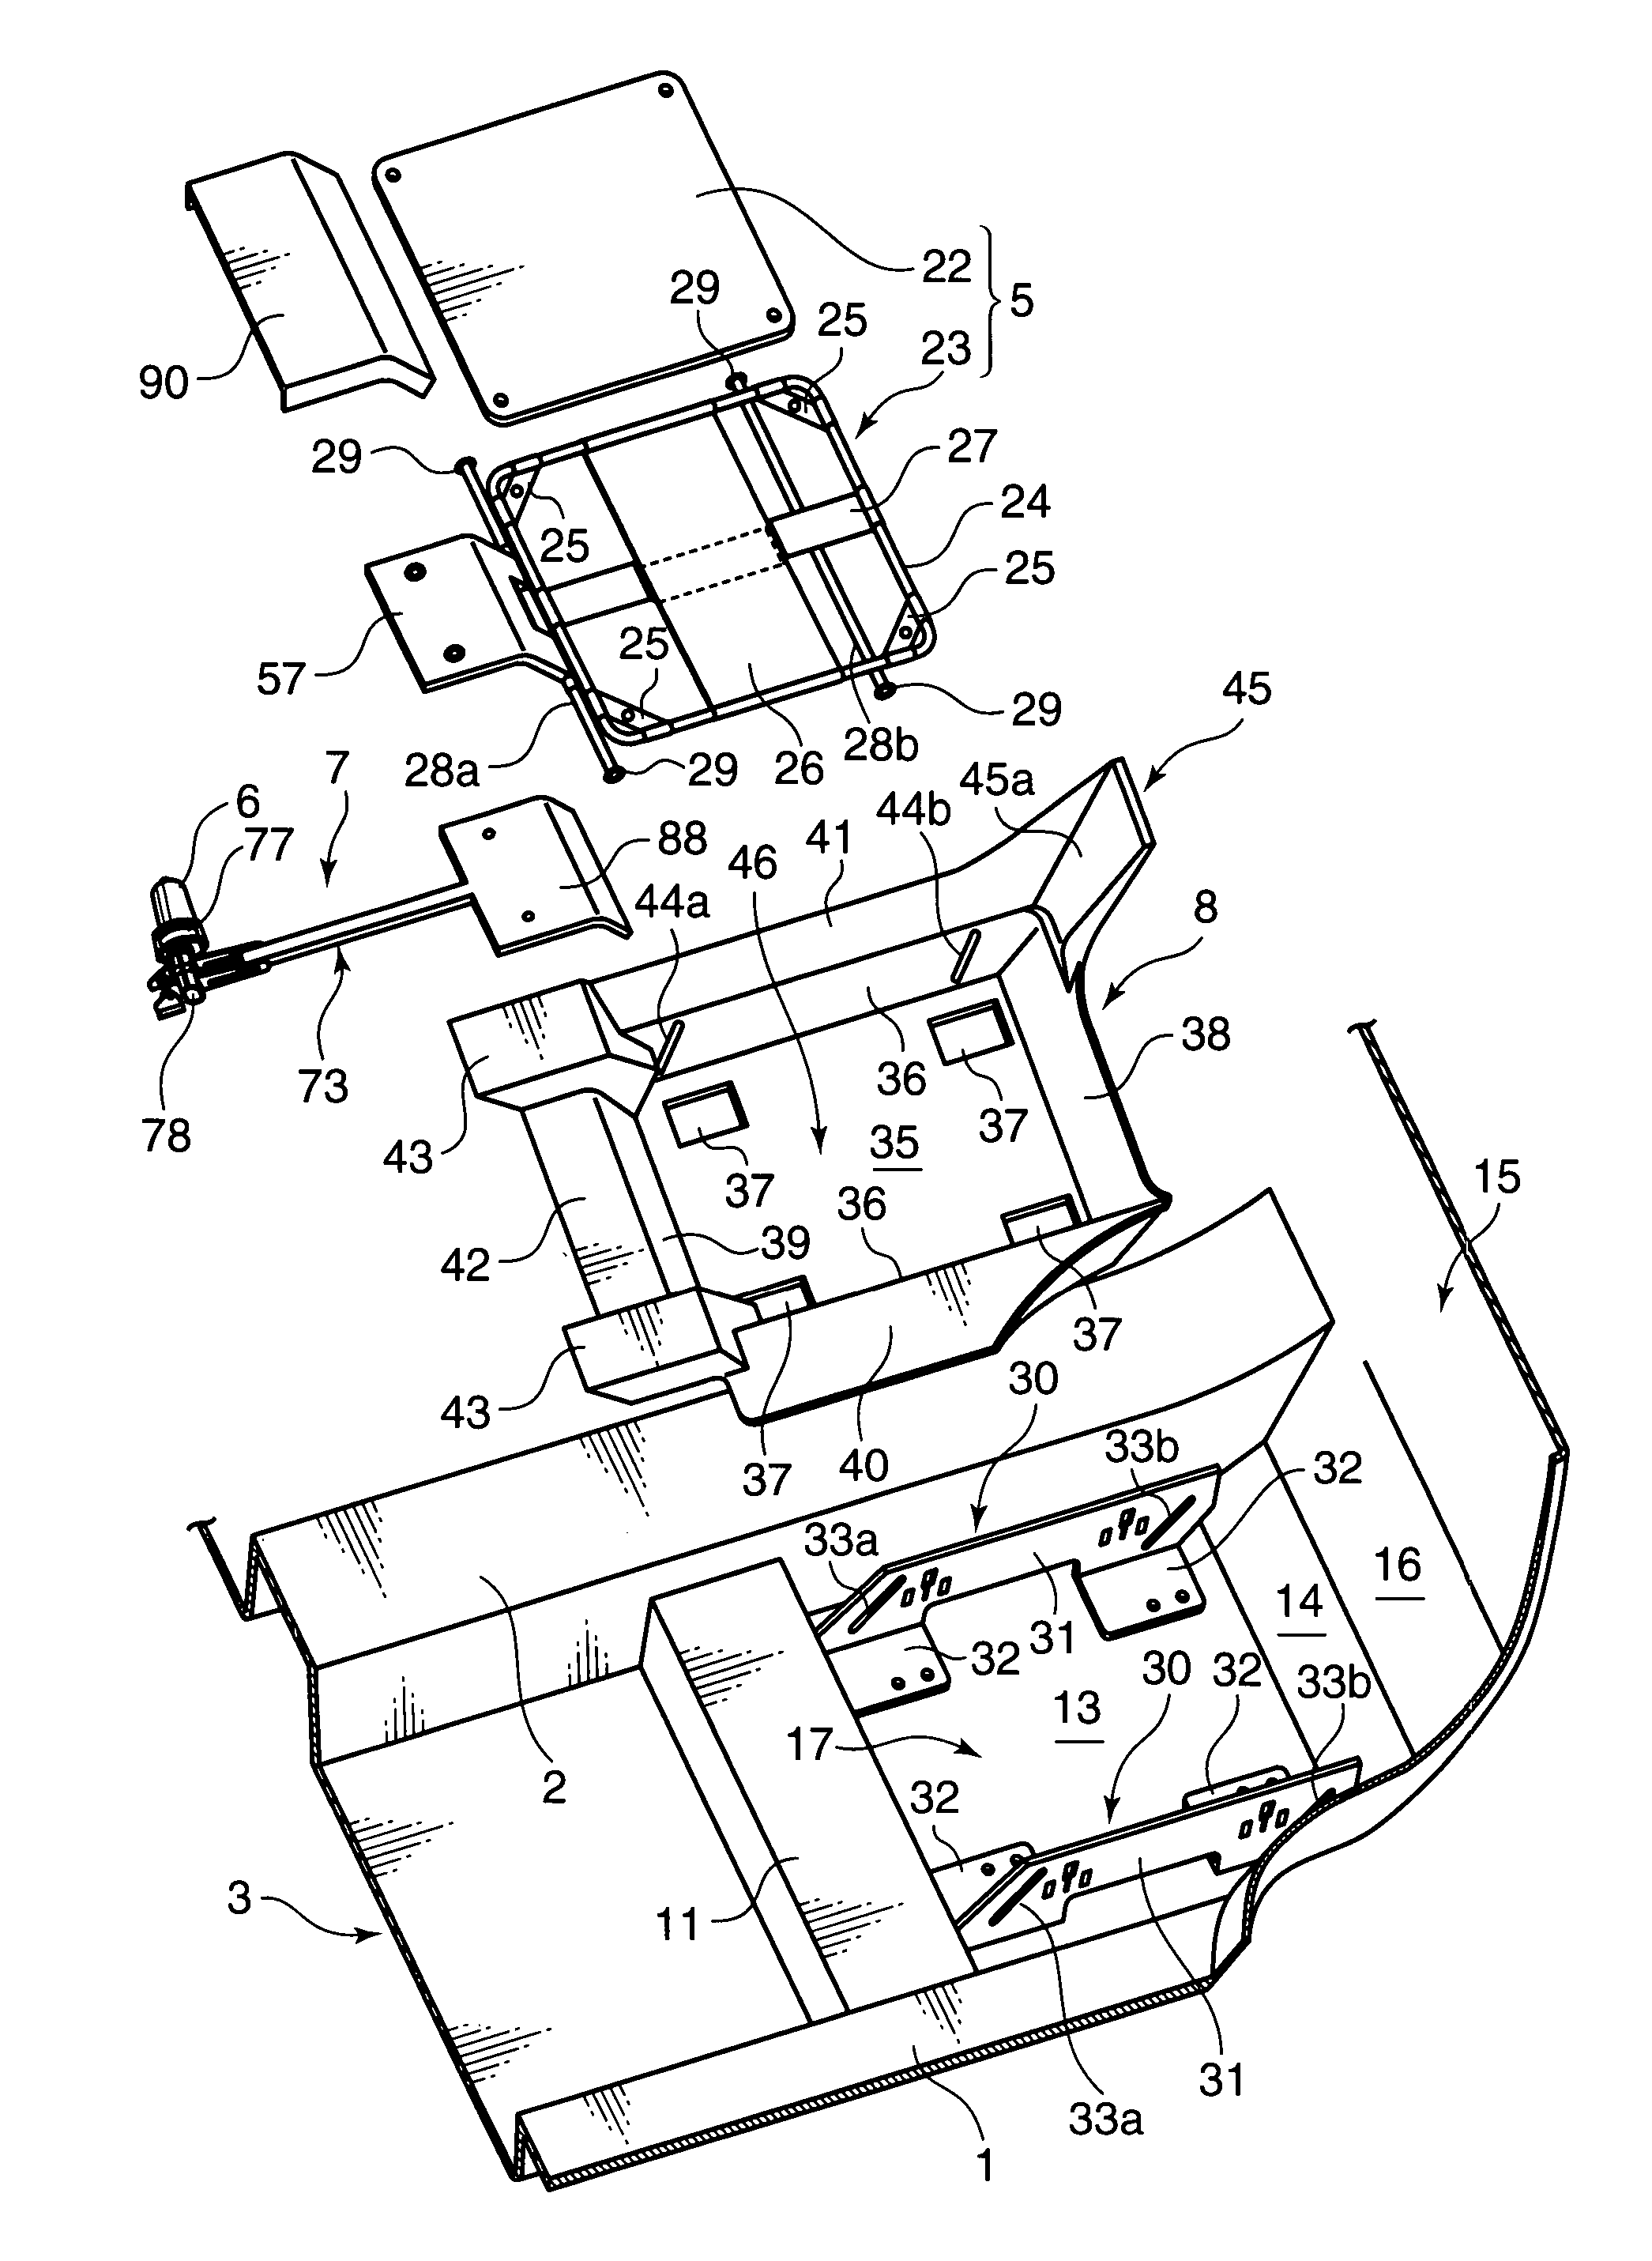 Movable floor apparatus for vehicle